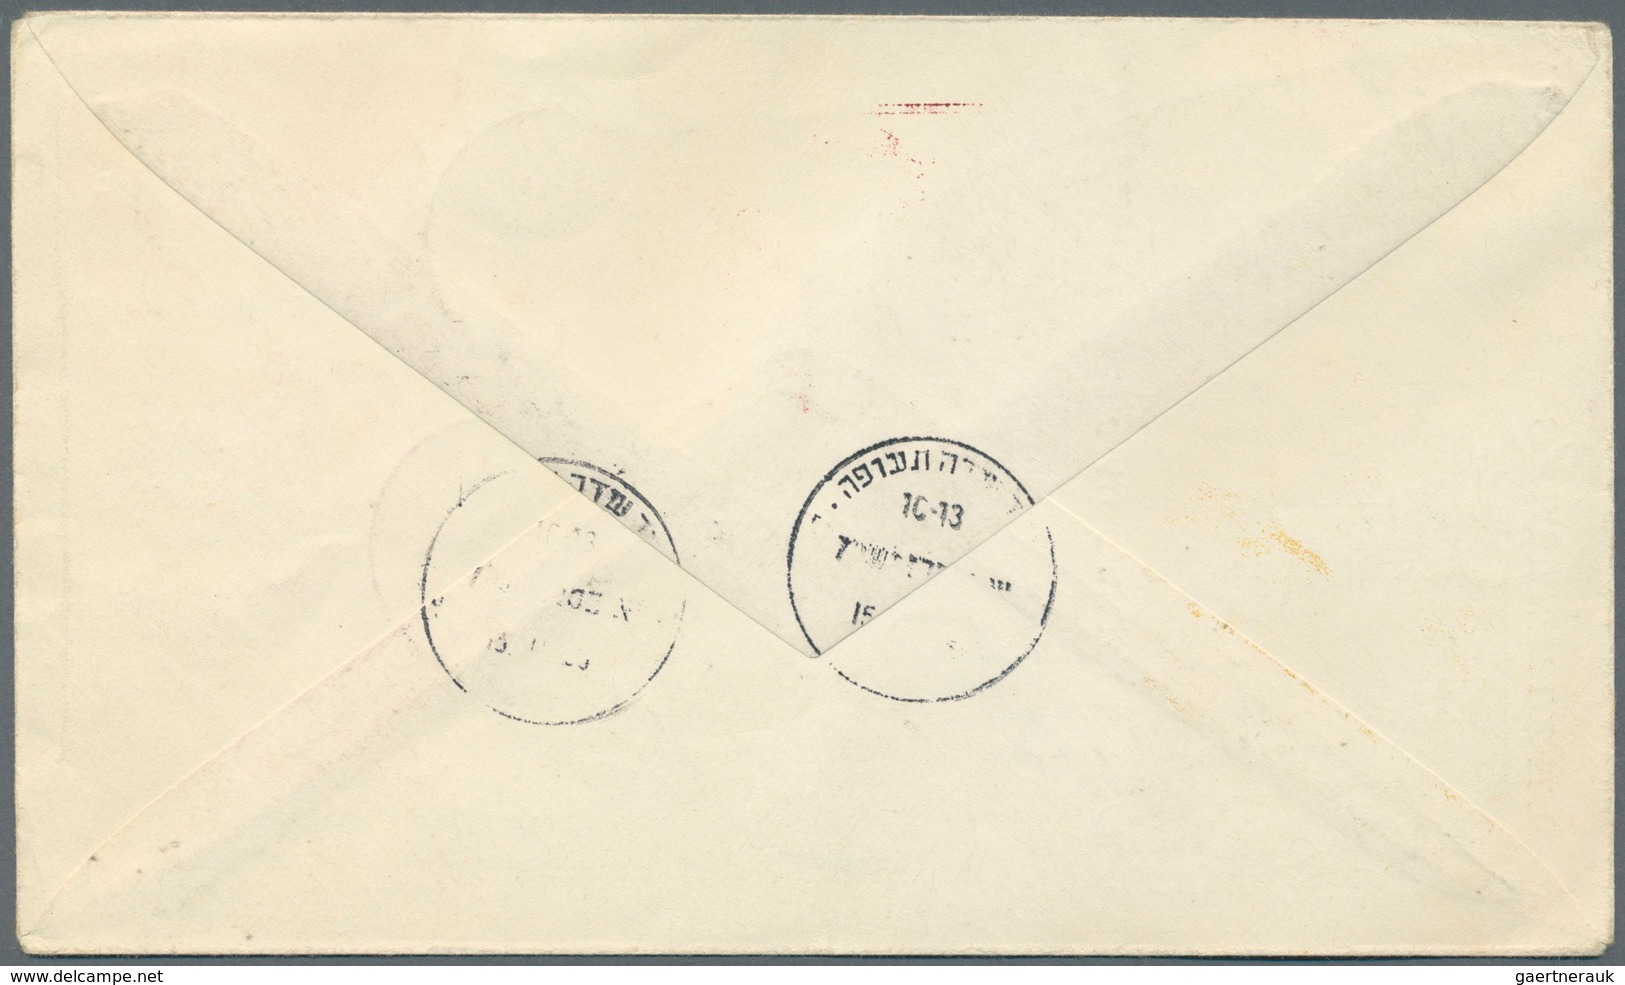 08961 Israel: 1956/67, Four covers during Wars: Three registered Special Flight covers on 15th Nov. 1957 L